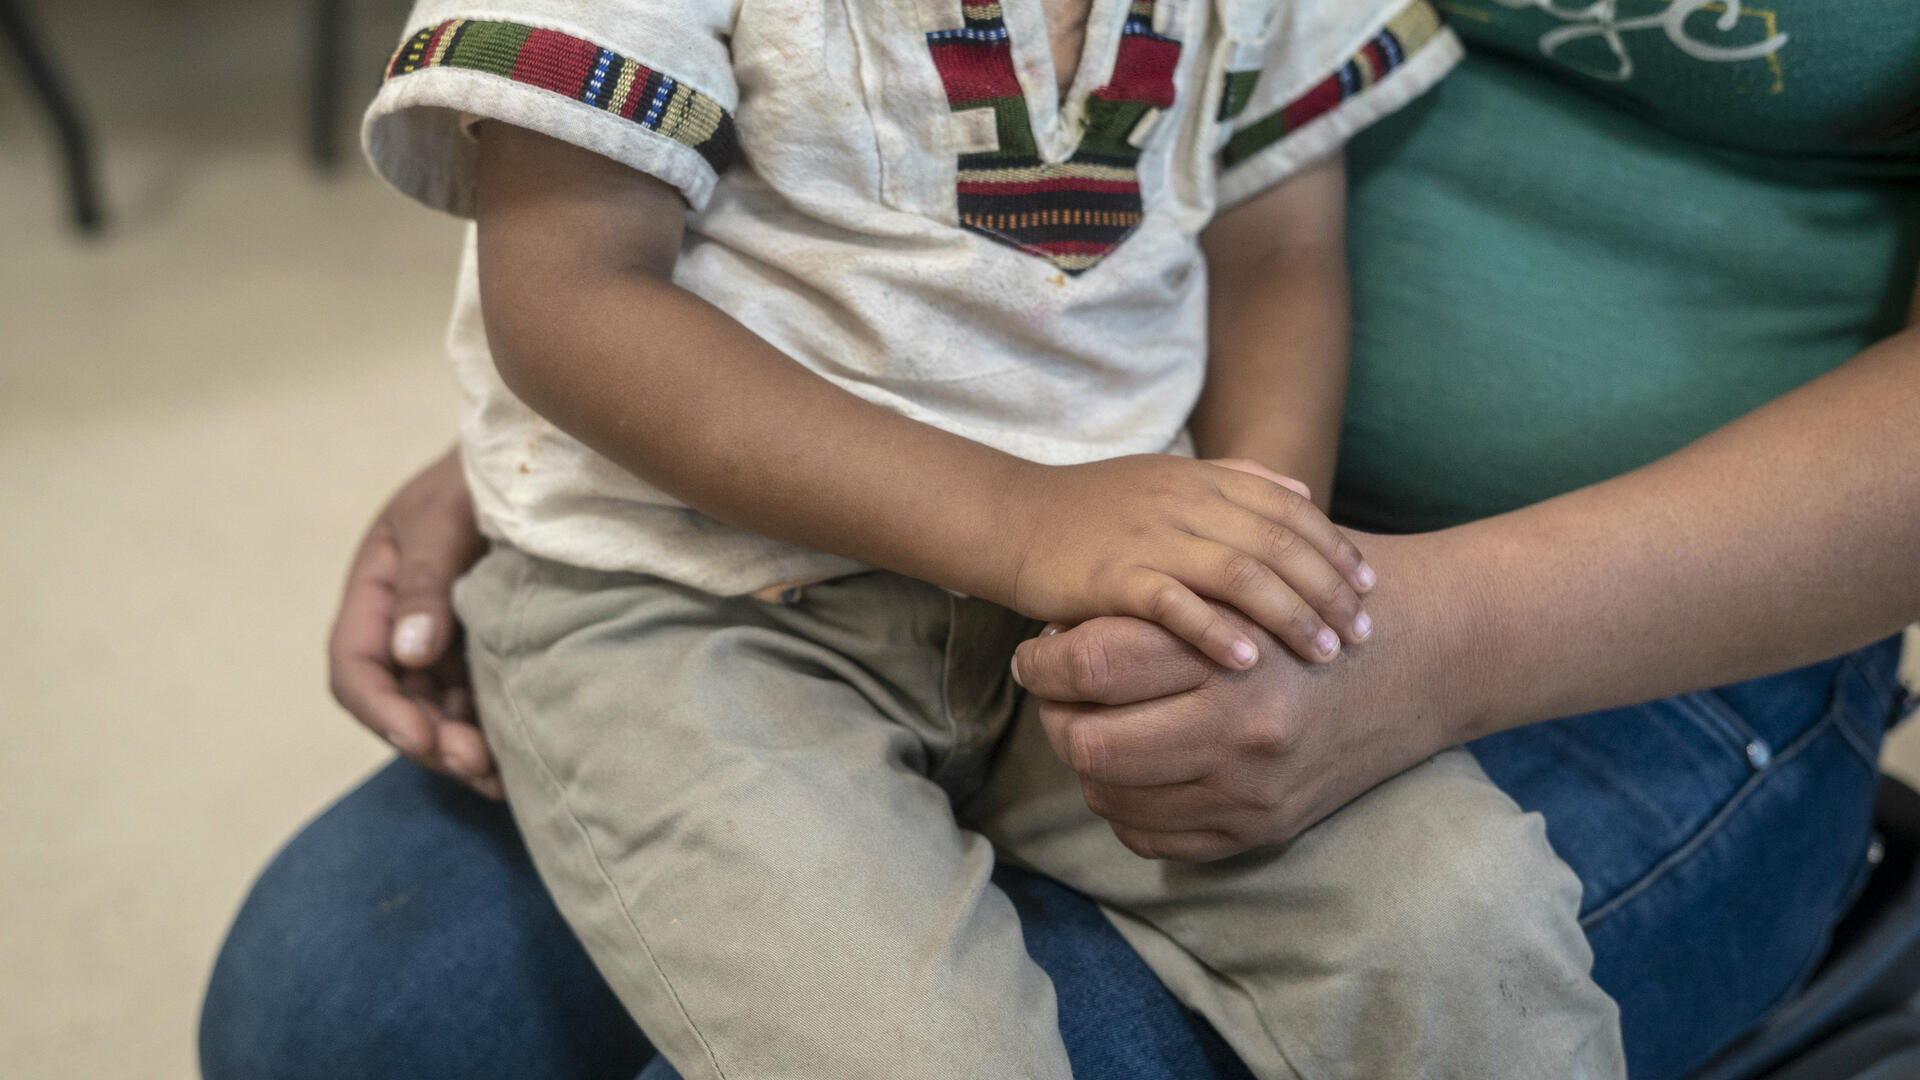 A Central American child sits on his mother's lap at an IRC day center for asylum seekers in Arizona